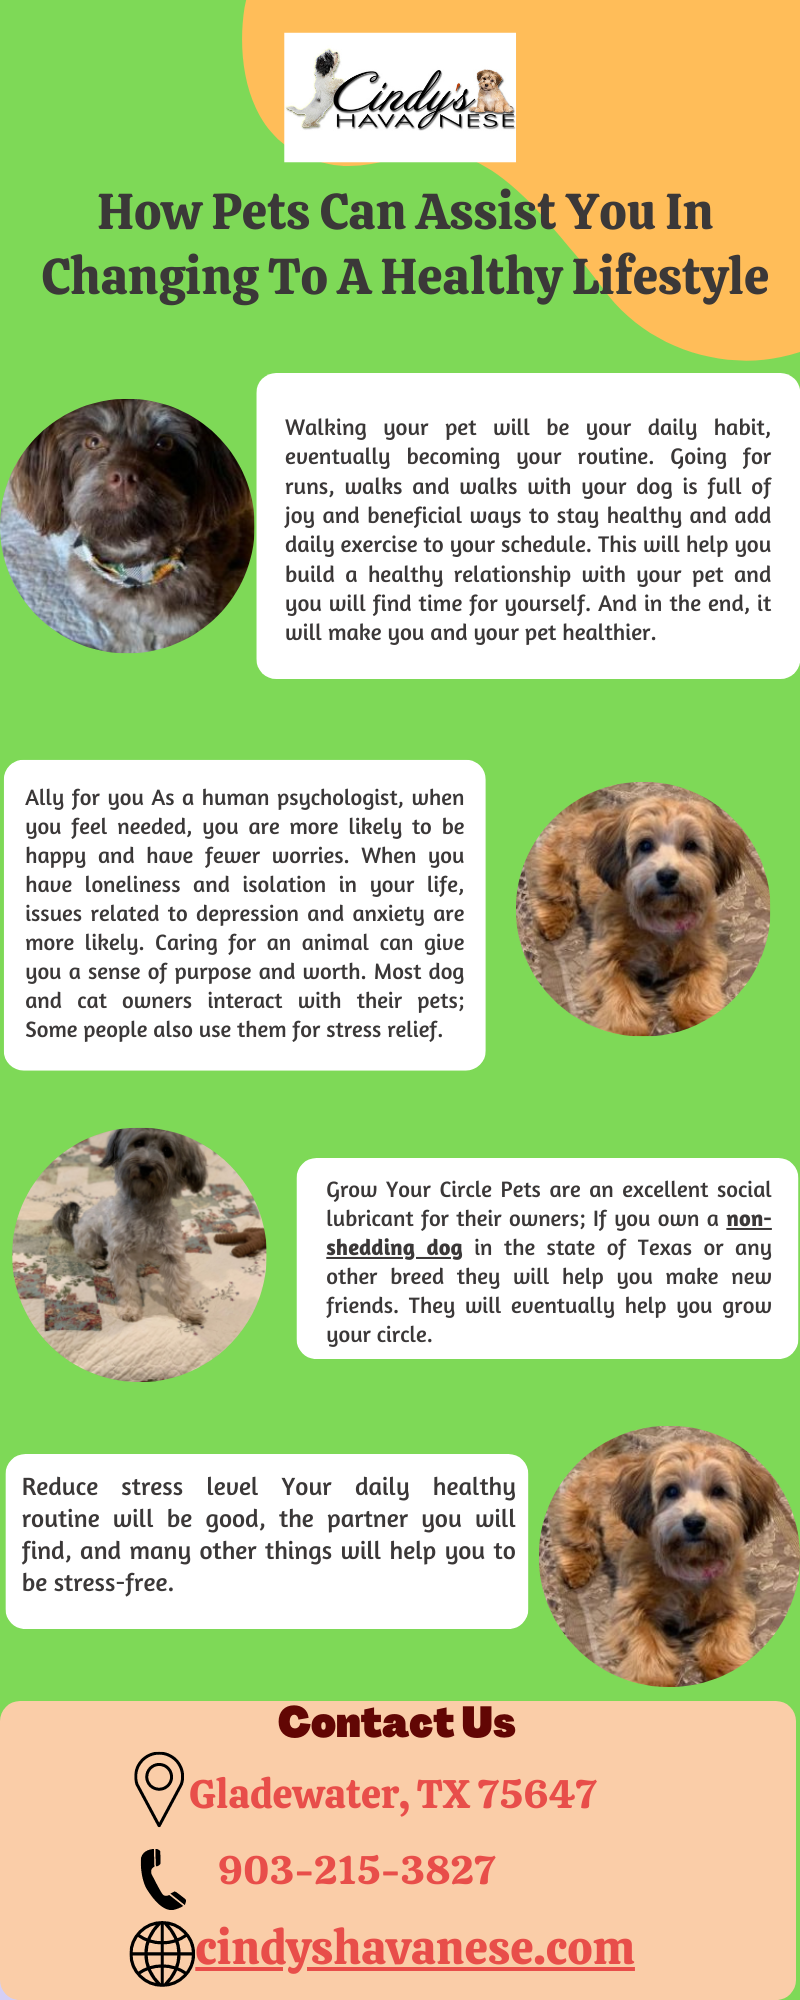 Buy Non Shedding Dogs In The state of Texas